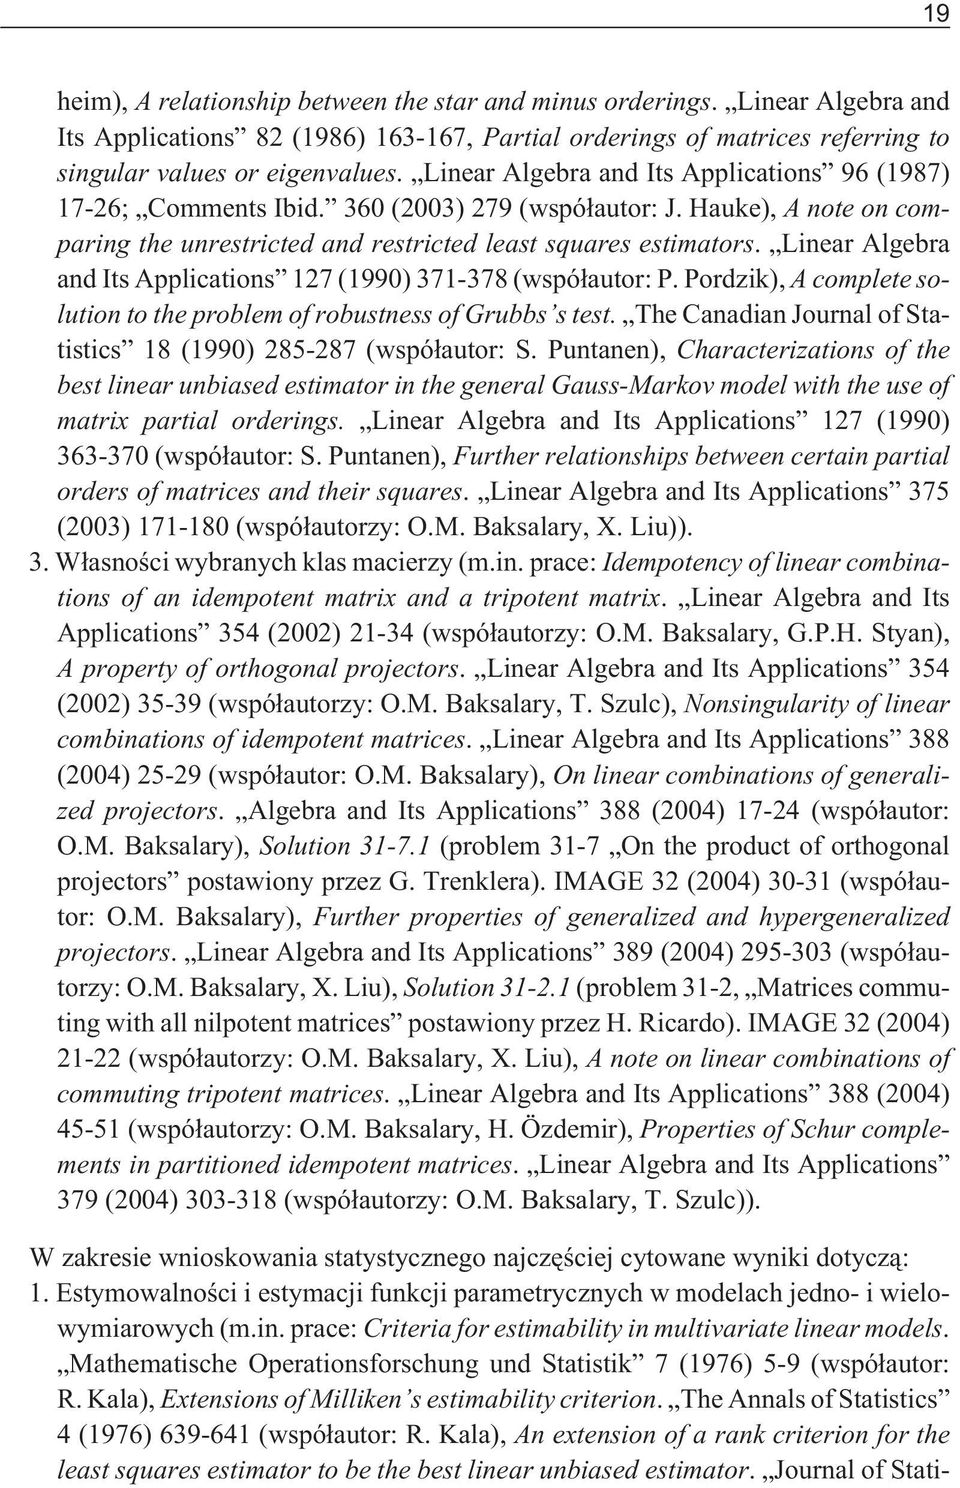 Linear Algebra and Its Applications 127 (1990) 371-378 (wspó³autor: P. Pordzik), A complete solution to the problem of robustness of Grubbs s test.